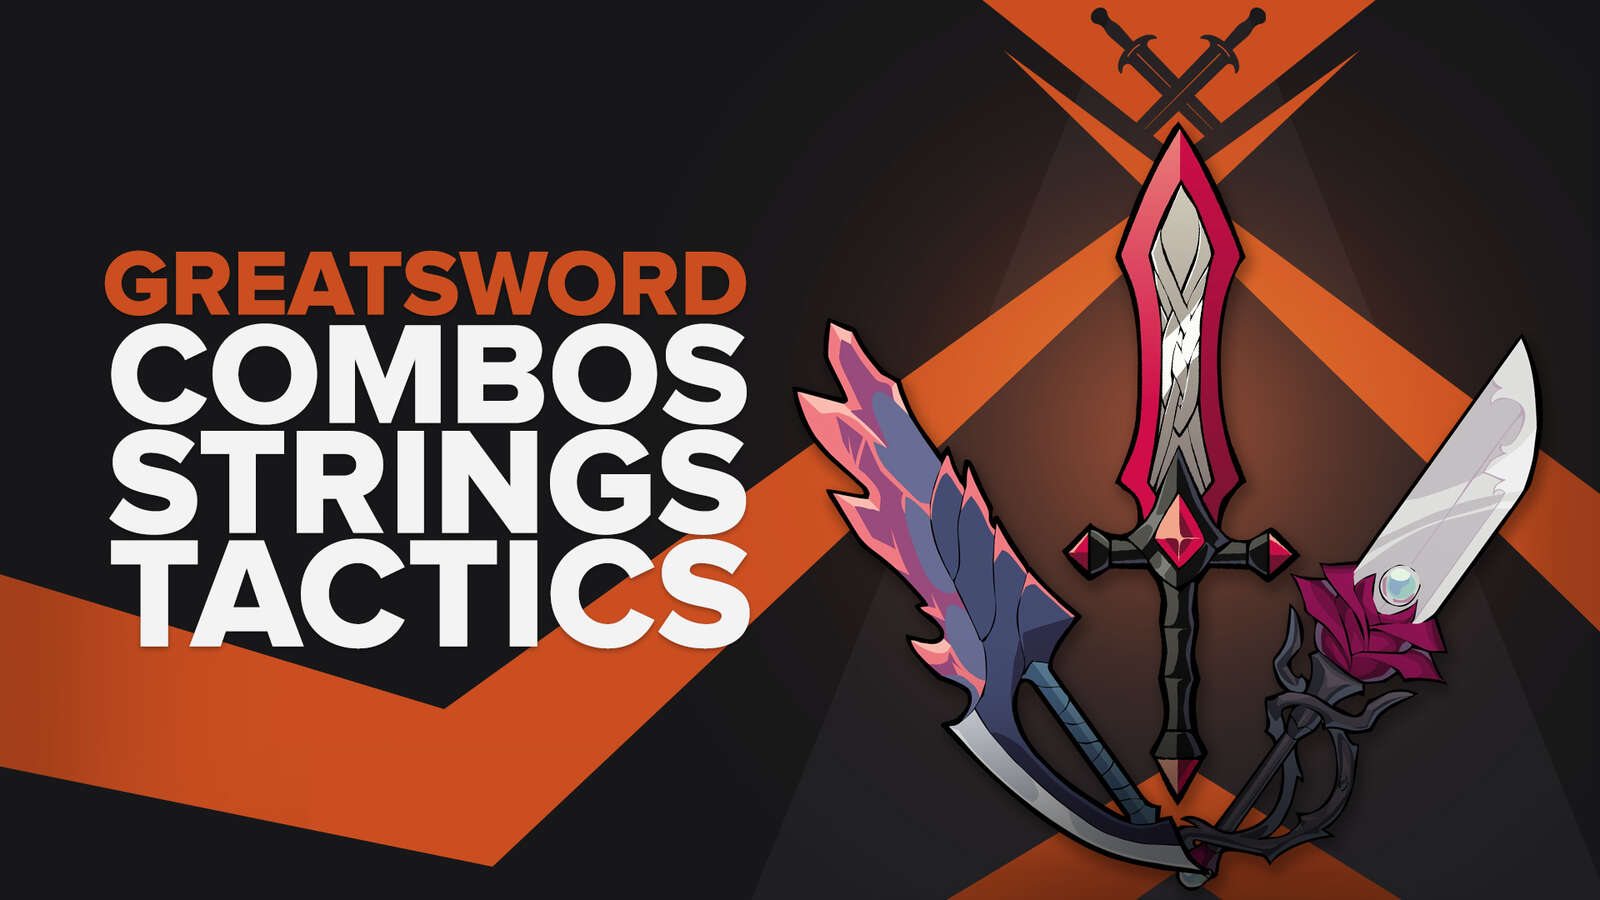 Best Greatsword combos, strings, and combat tactics in Brawlhalla